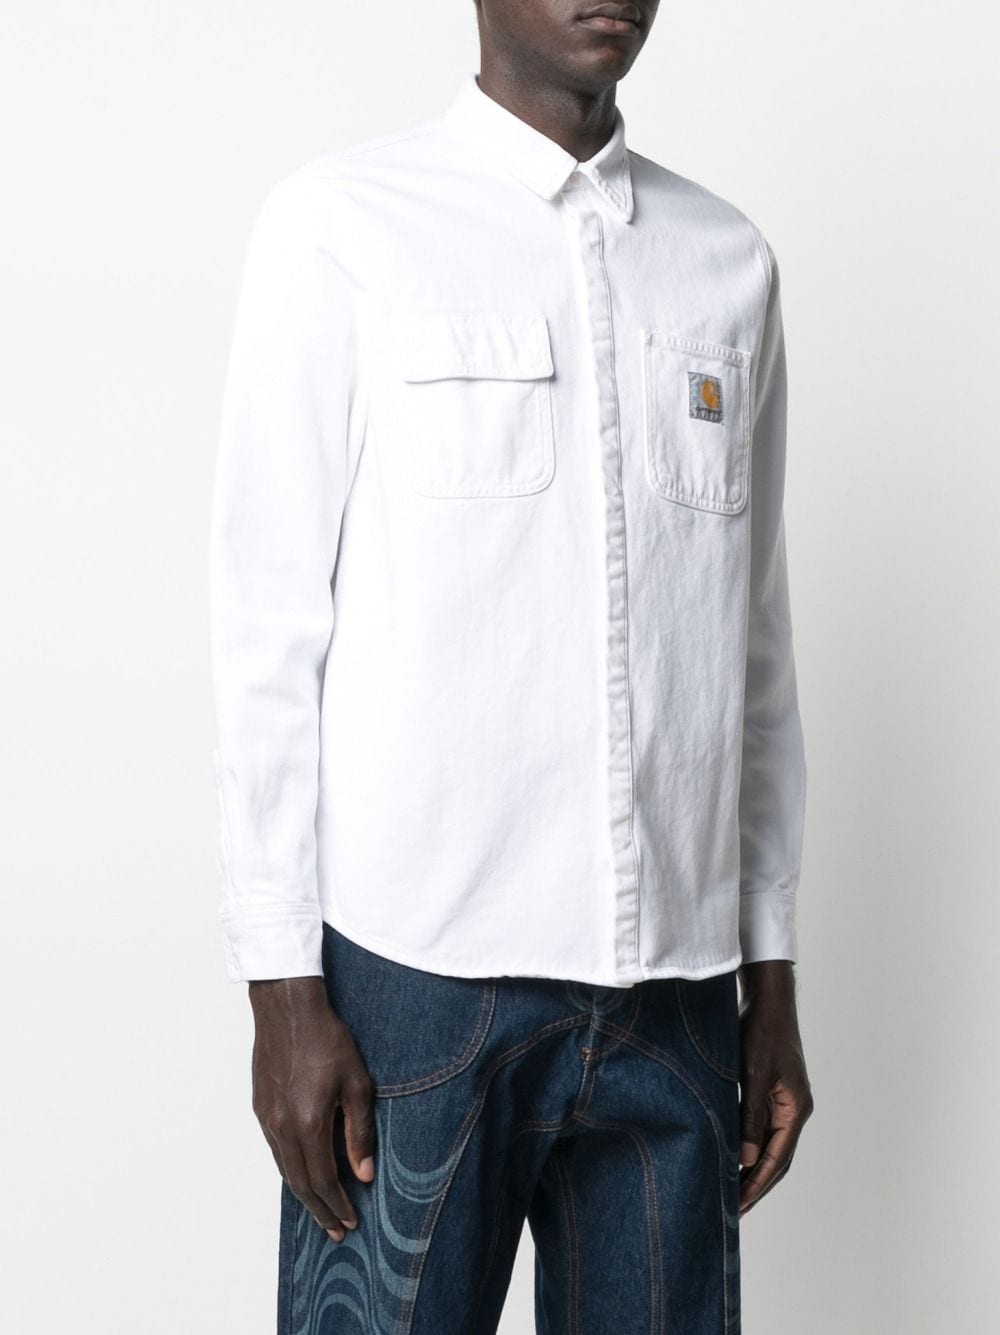 Shop Carhartt WIP organic-cotton shirt jacket with Express Delivery ...